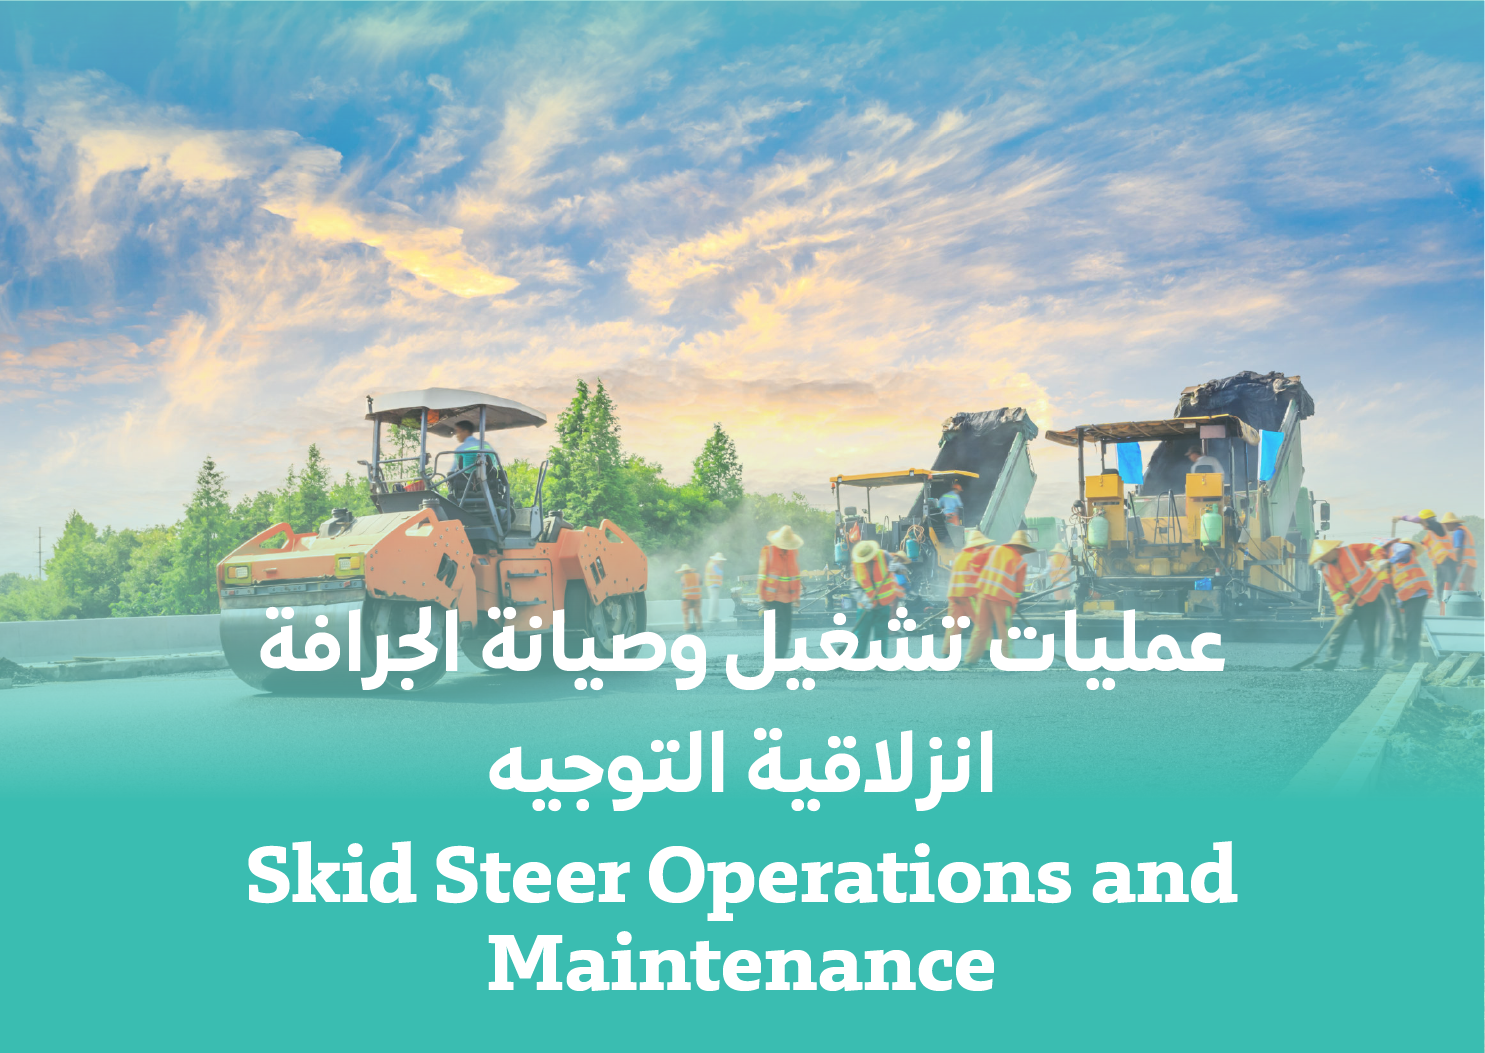 Skid Steer Operations and Maintenance